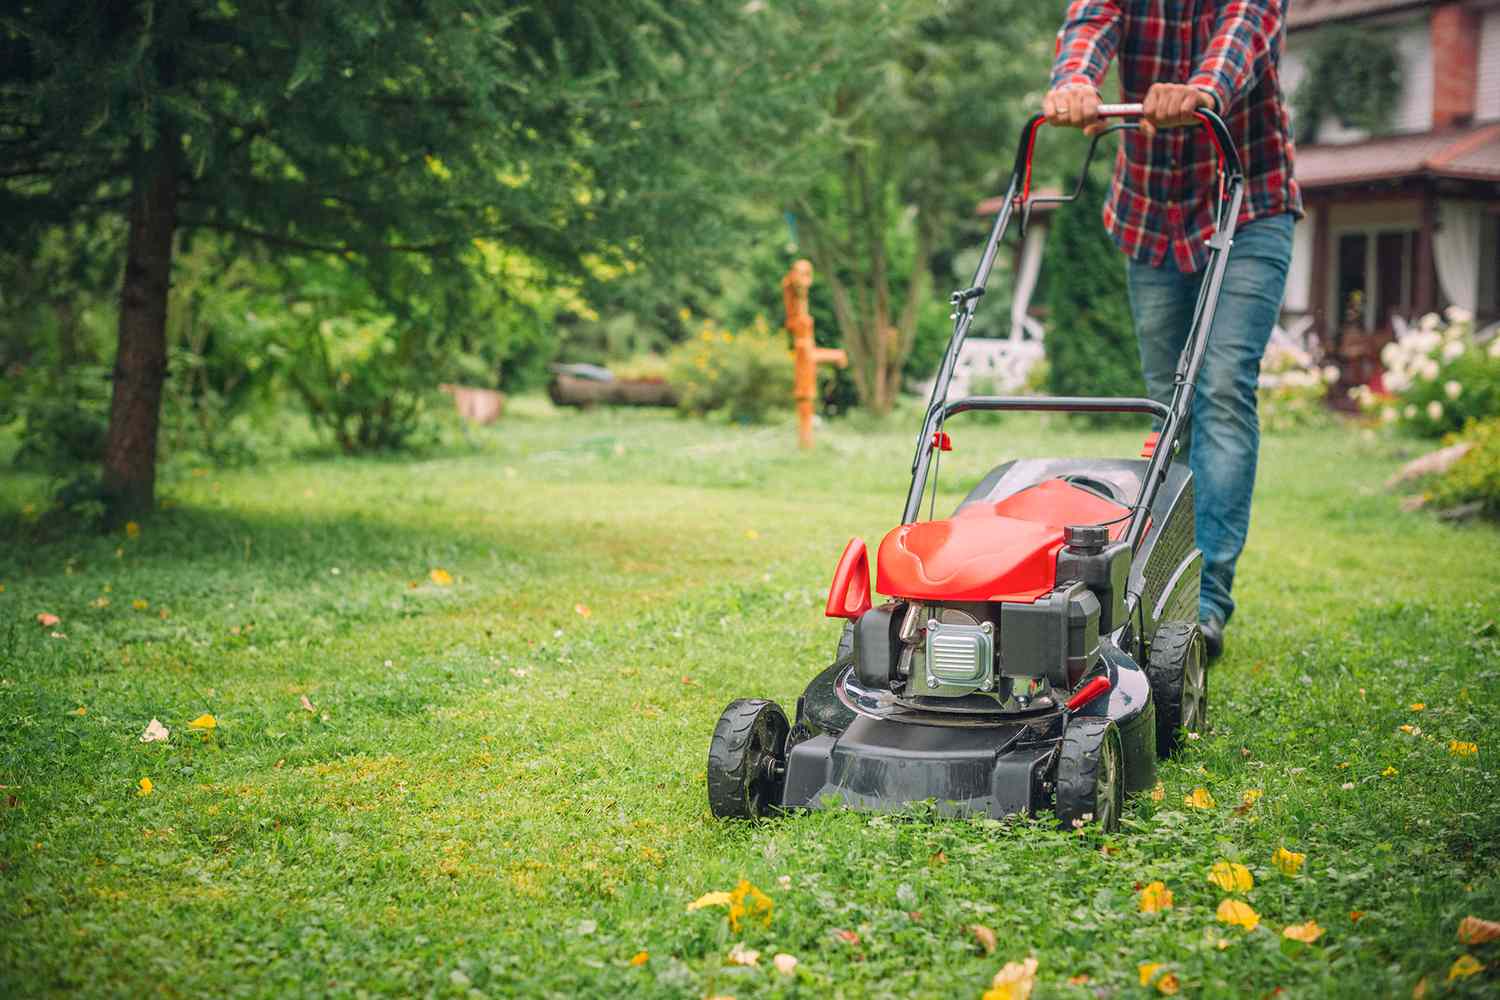 Key Considerations for Self Propelled Lawn Mower Electric Start